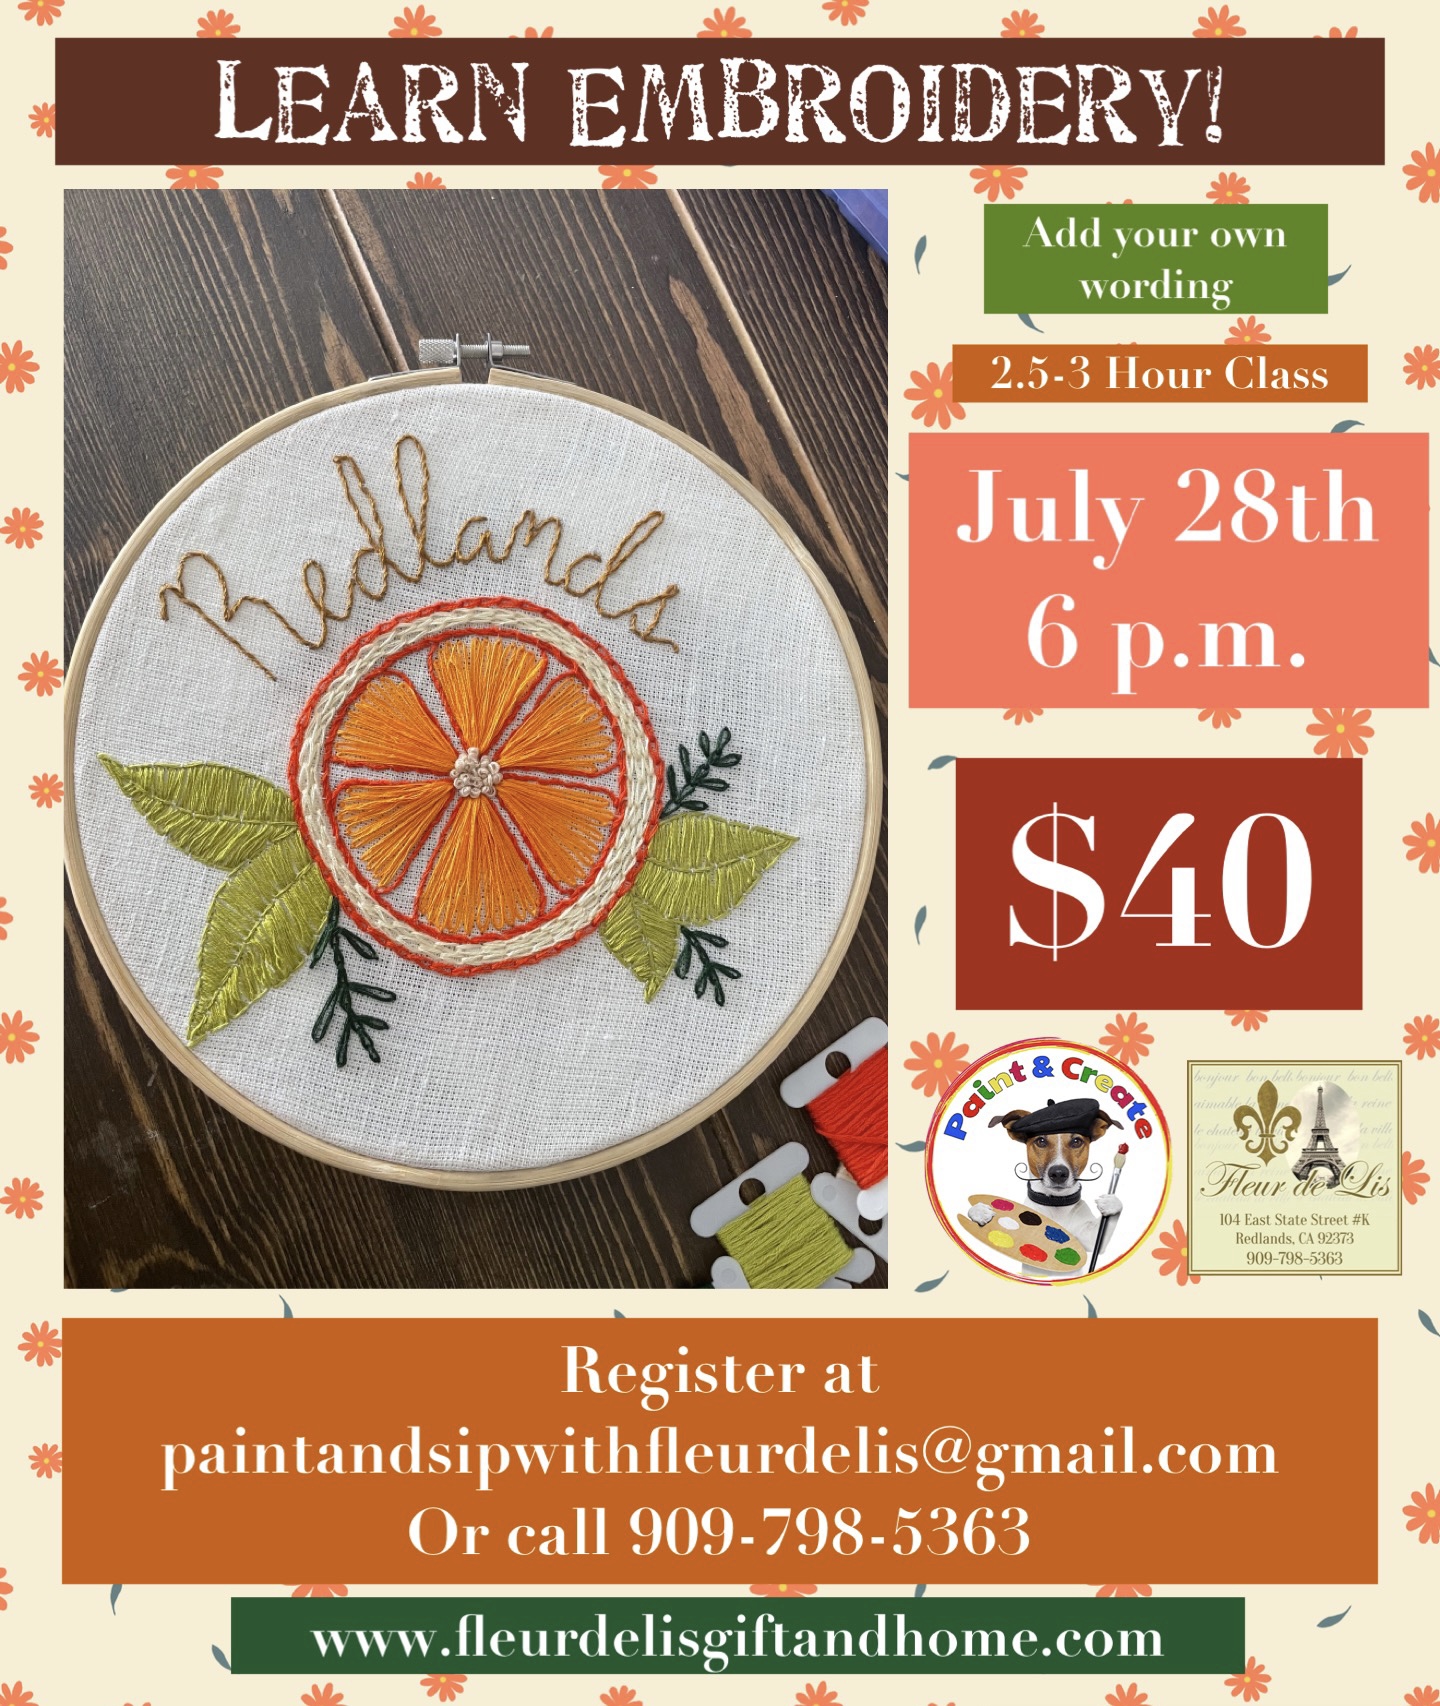 Learn Embroidery July 28th 6 p.m.